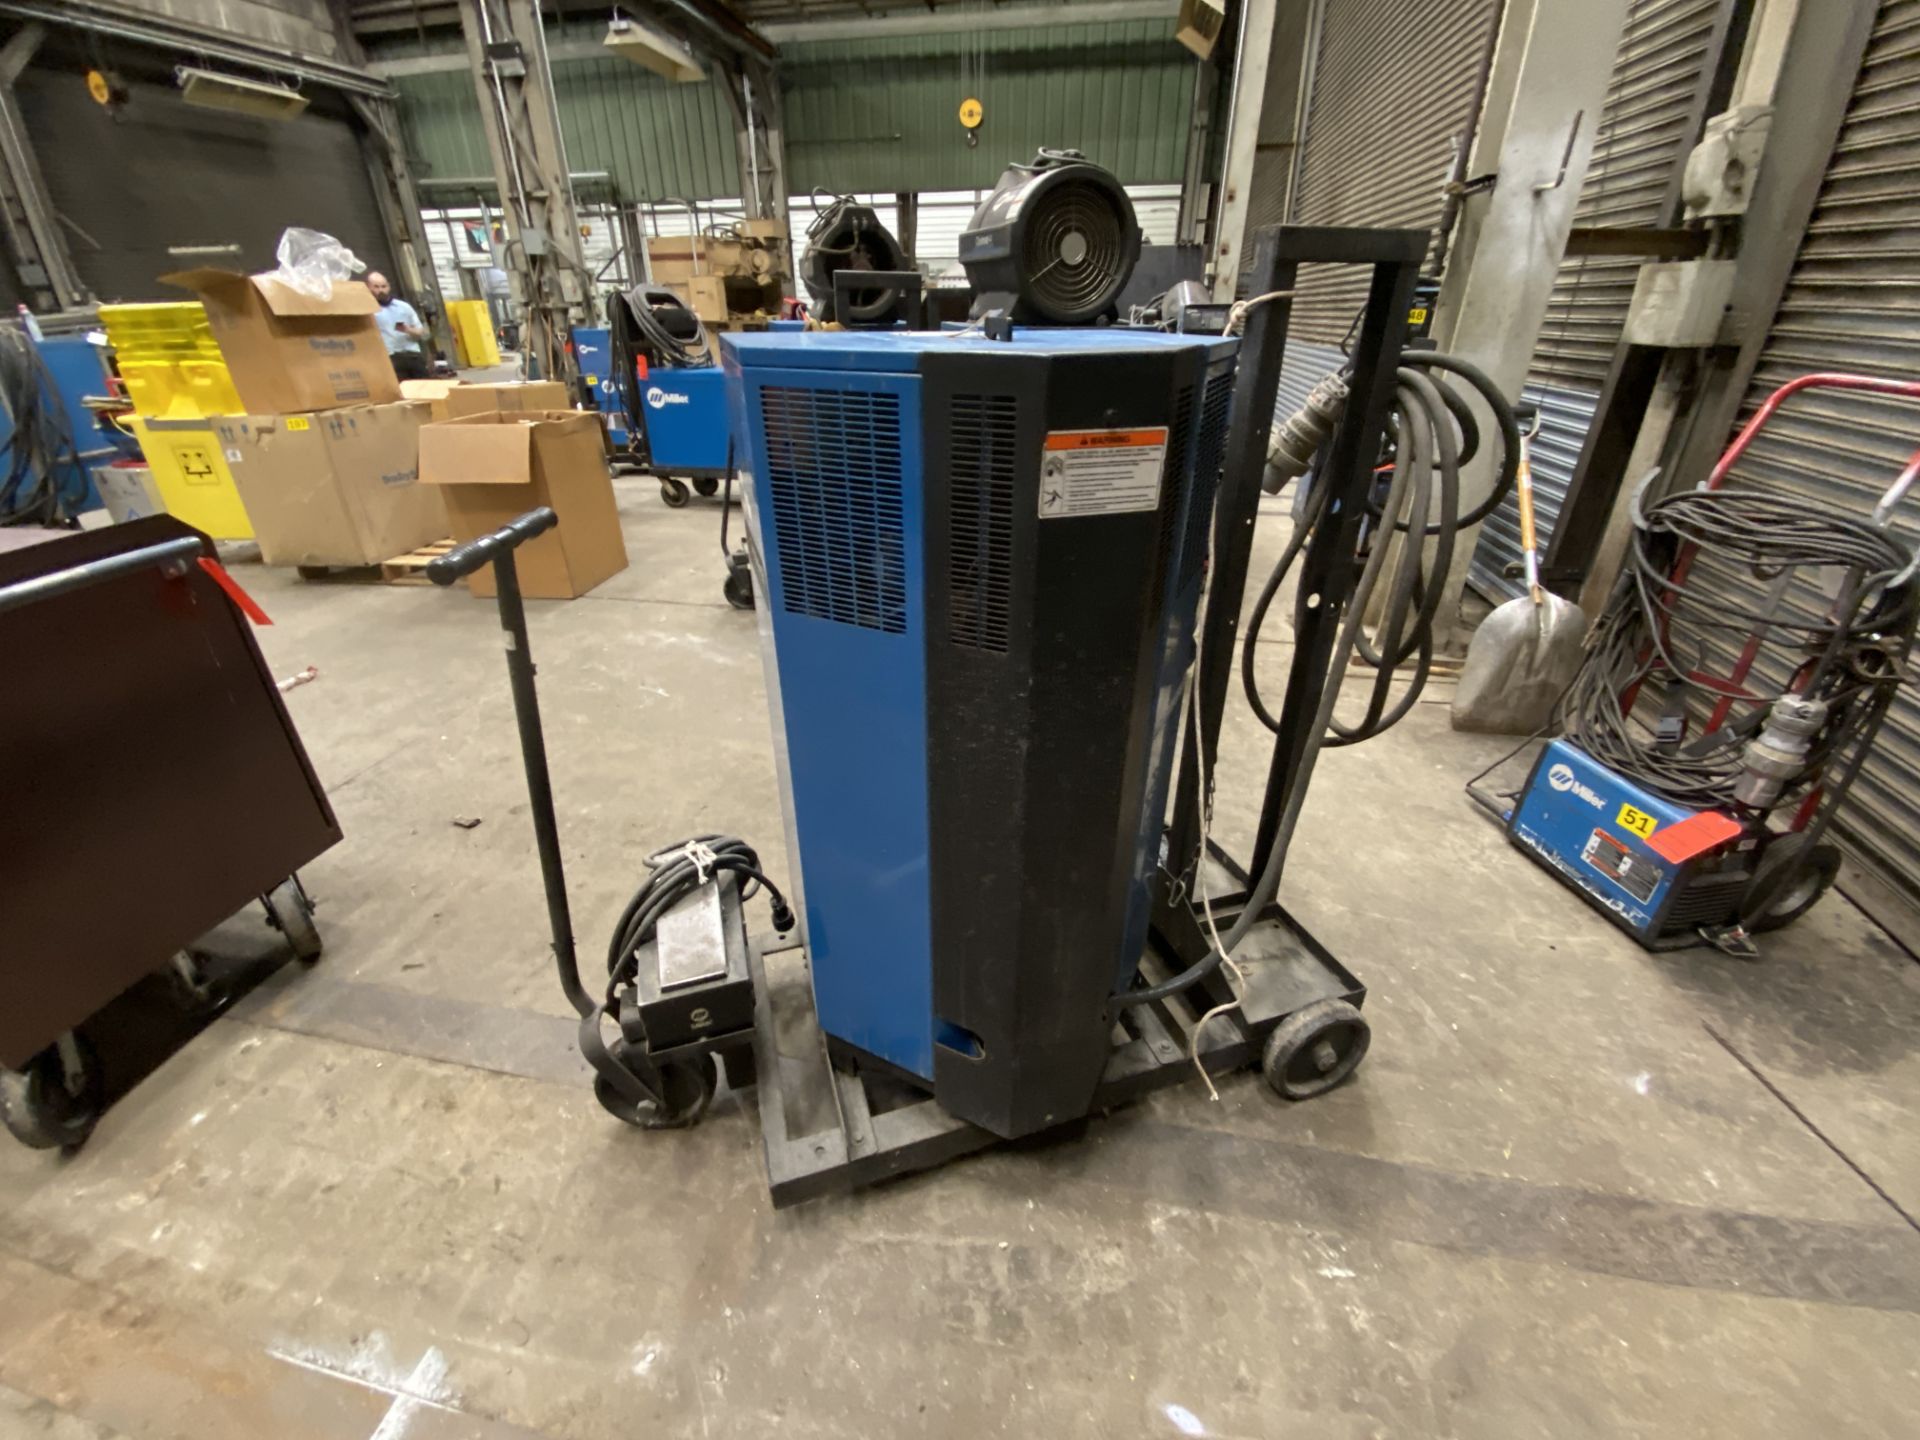 Miller synchrowave 351 CC ac/DC arc welder SN KH316085 with foot peddle controls on rolling cart - Image 2 of 2